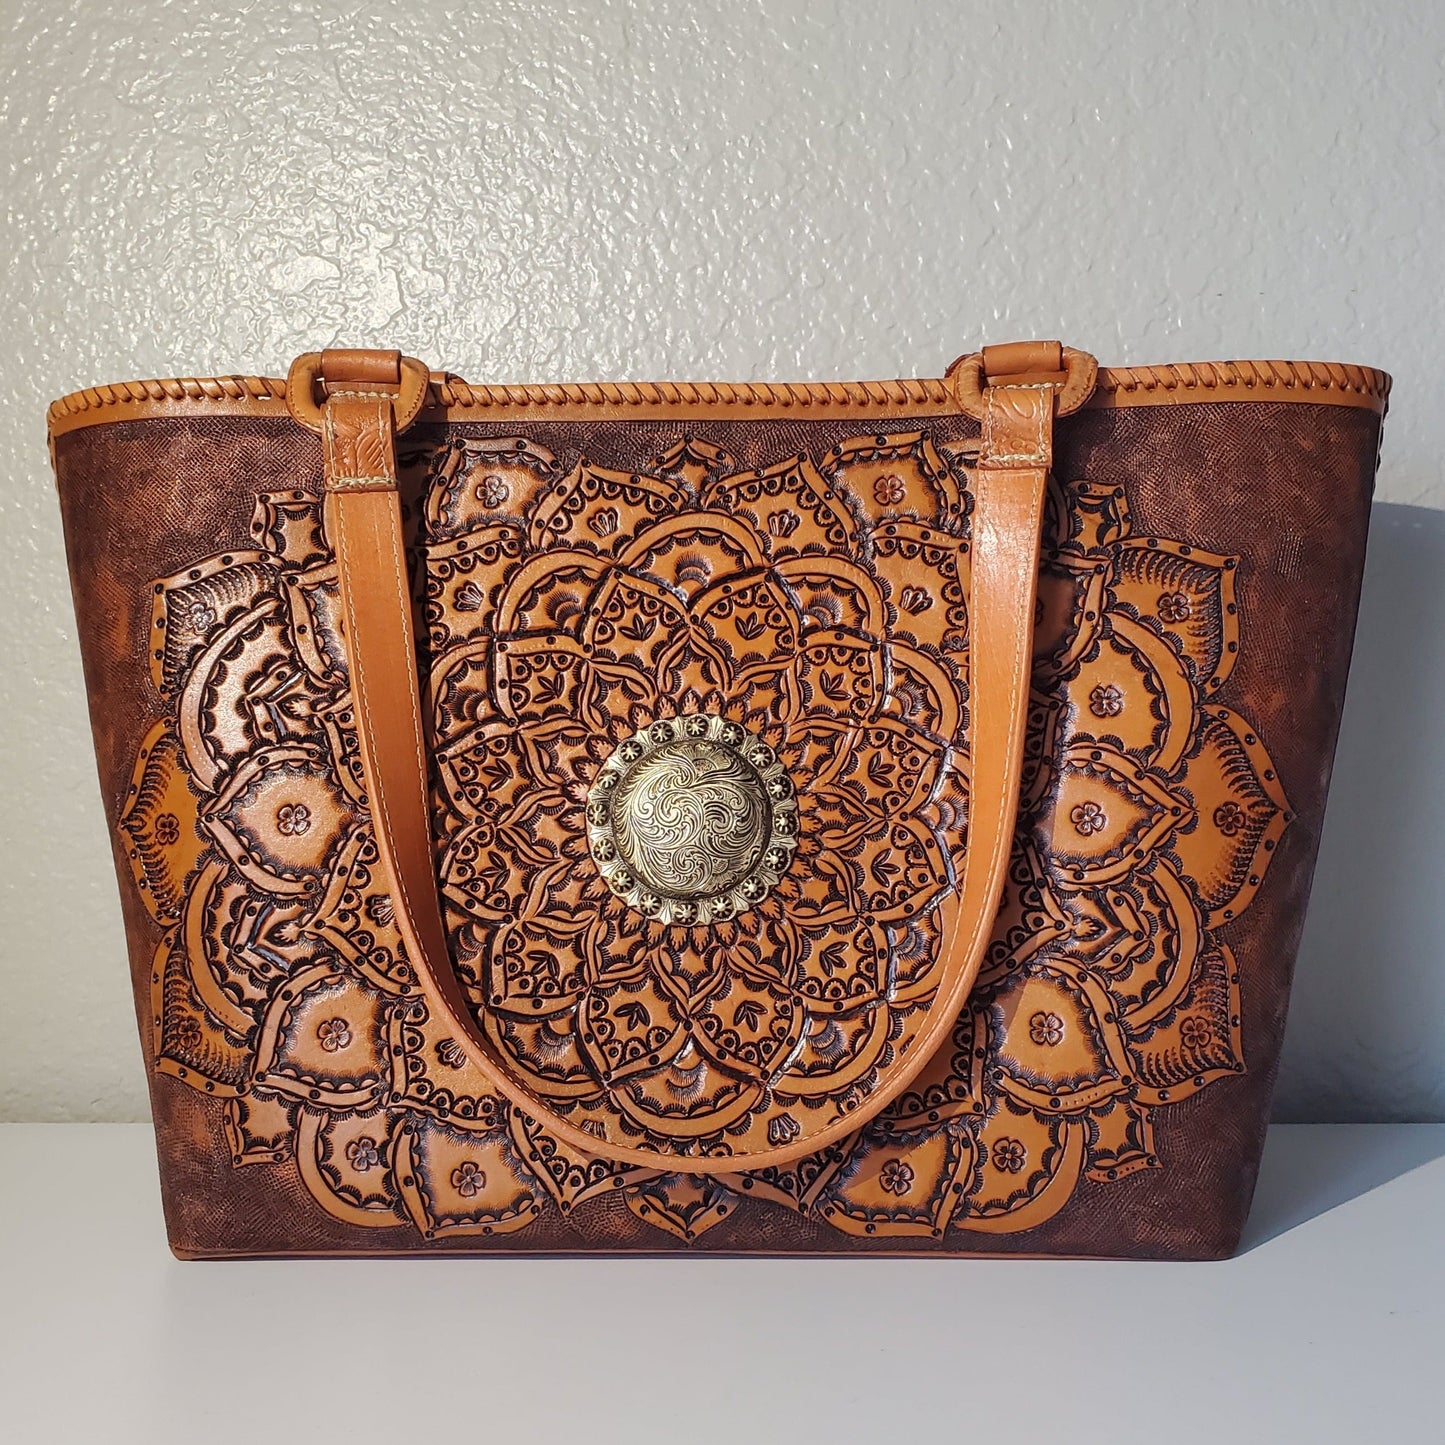 Hand Made Leather Tote Bag "MIA" by MIOHERMOSA Honey Mia Mayan Sun Top